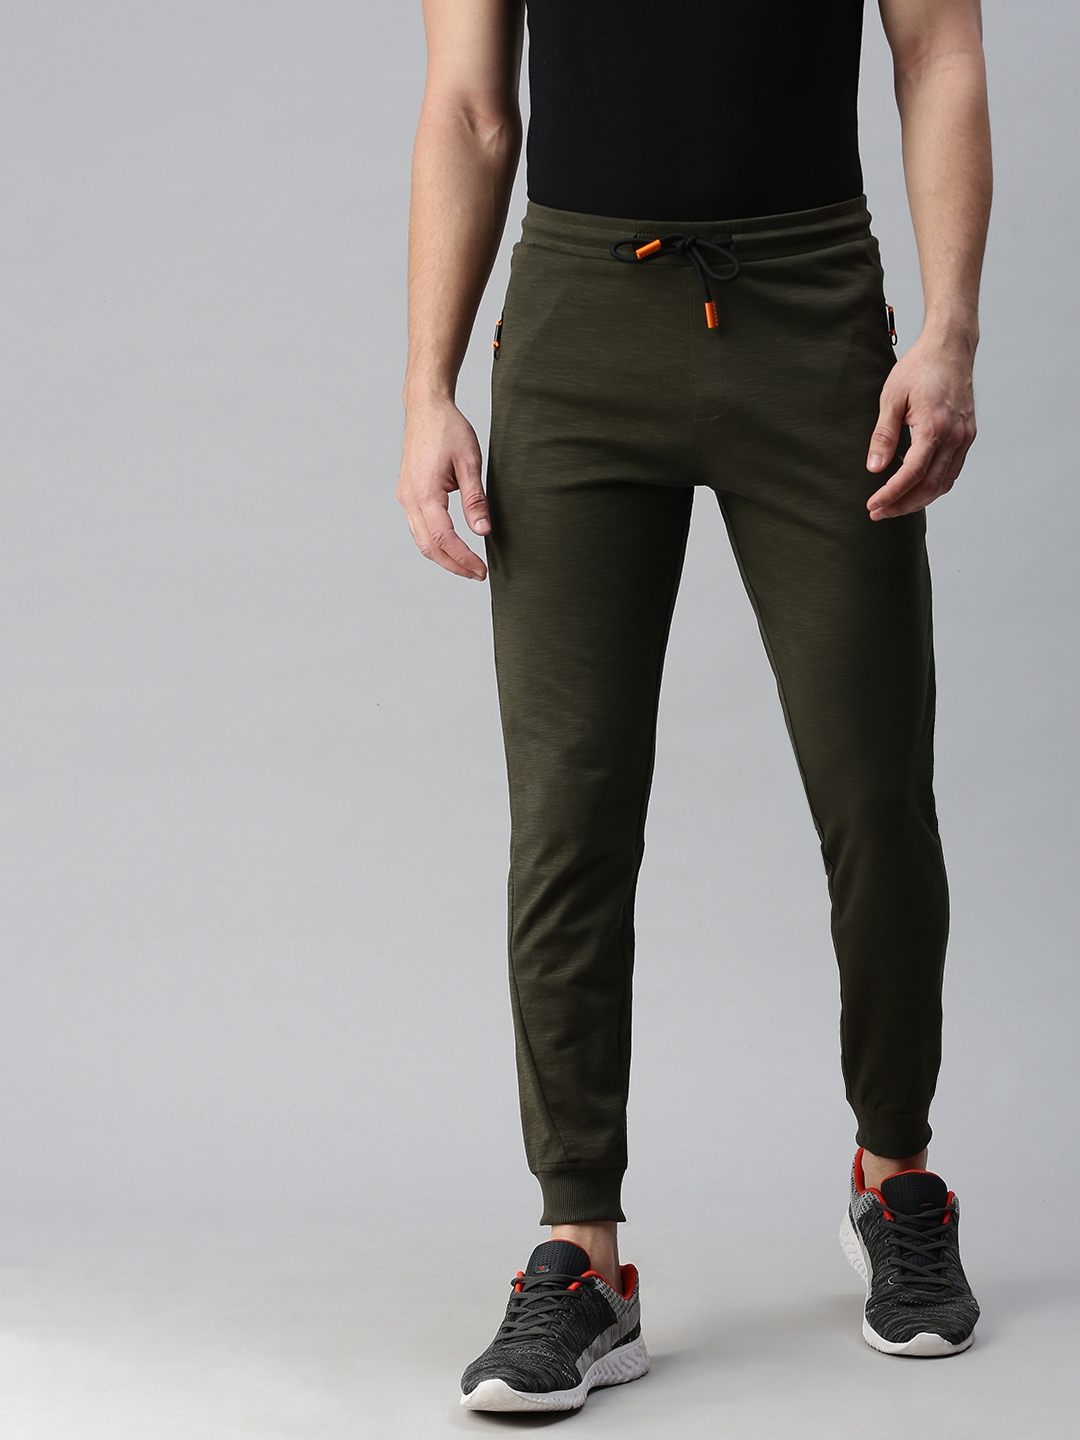 Slim fit jogger pants with Archive logo